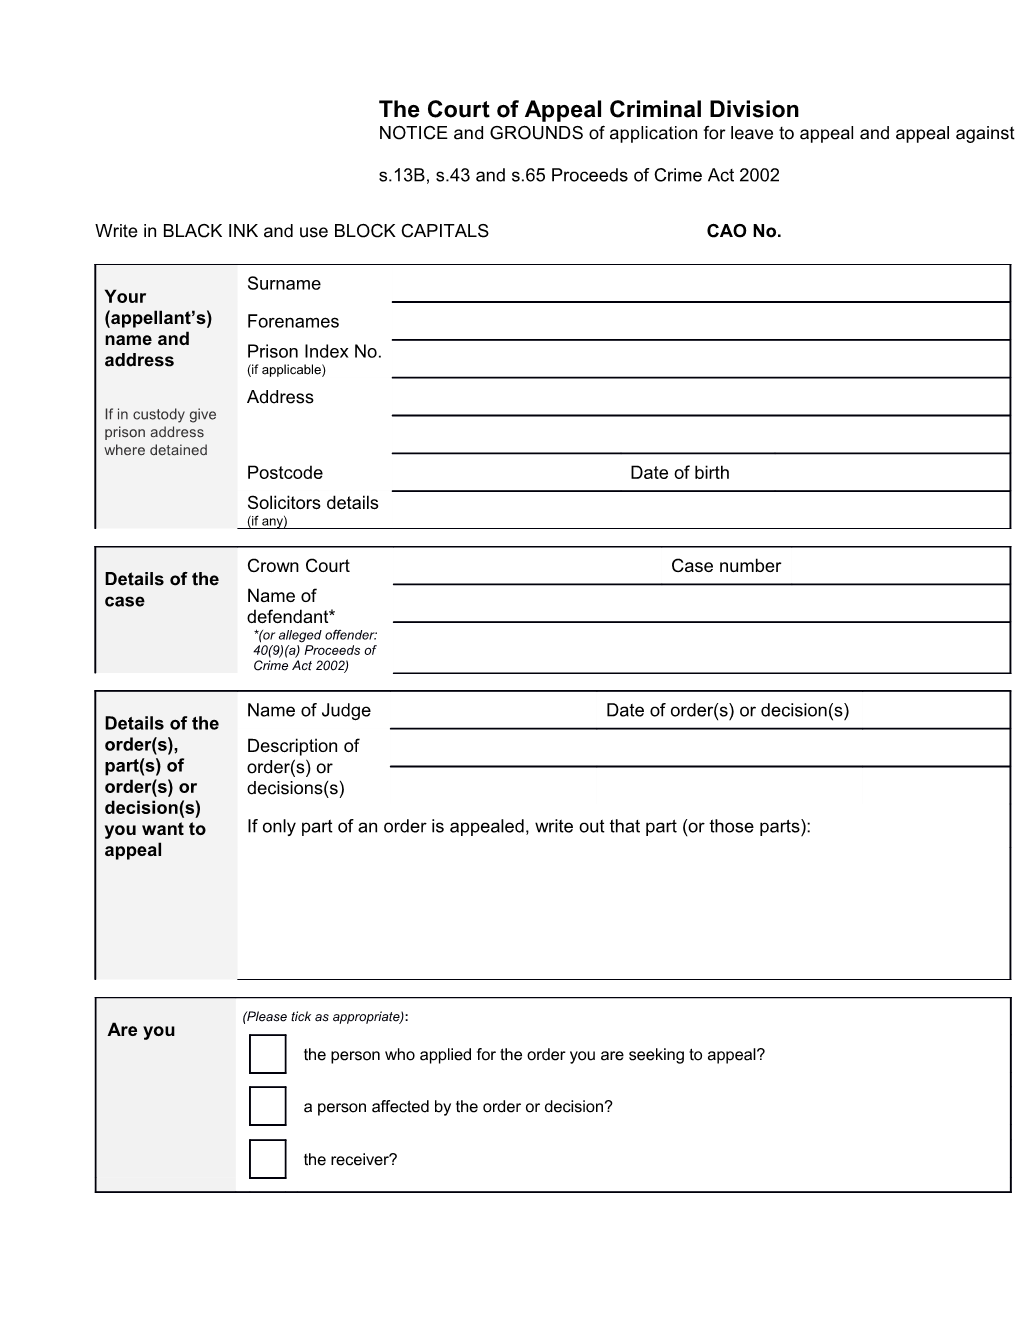 On Completion Please Send This Form to the Crown Court Where the Order Was Made